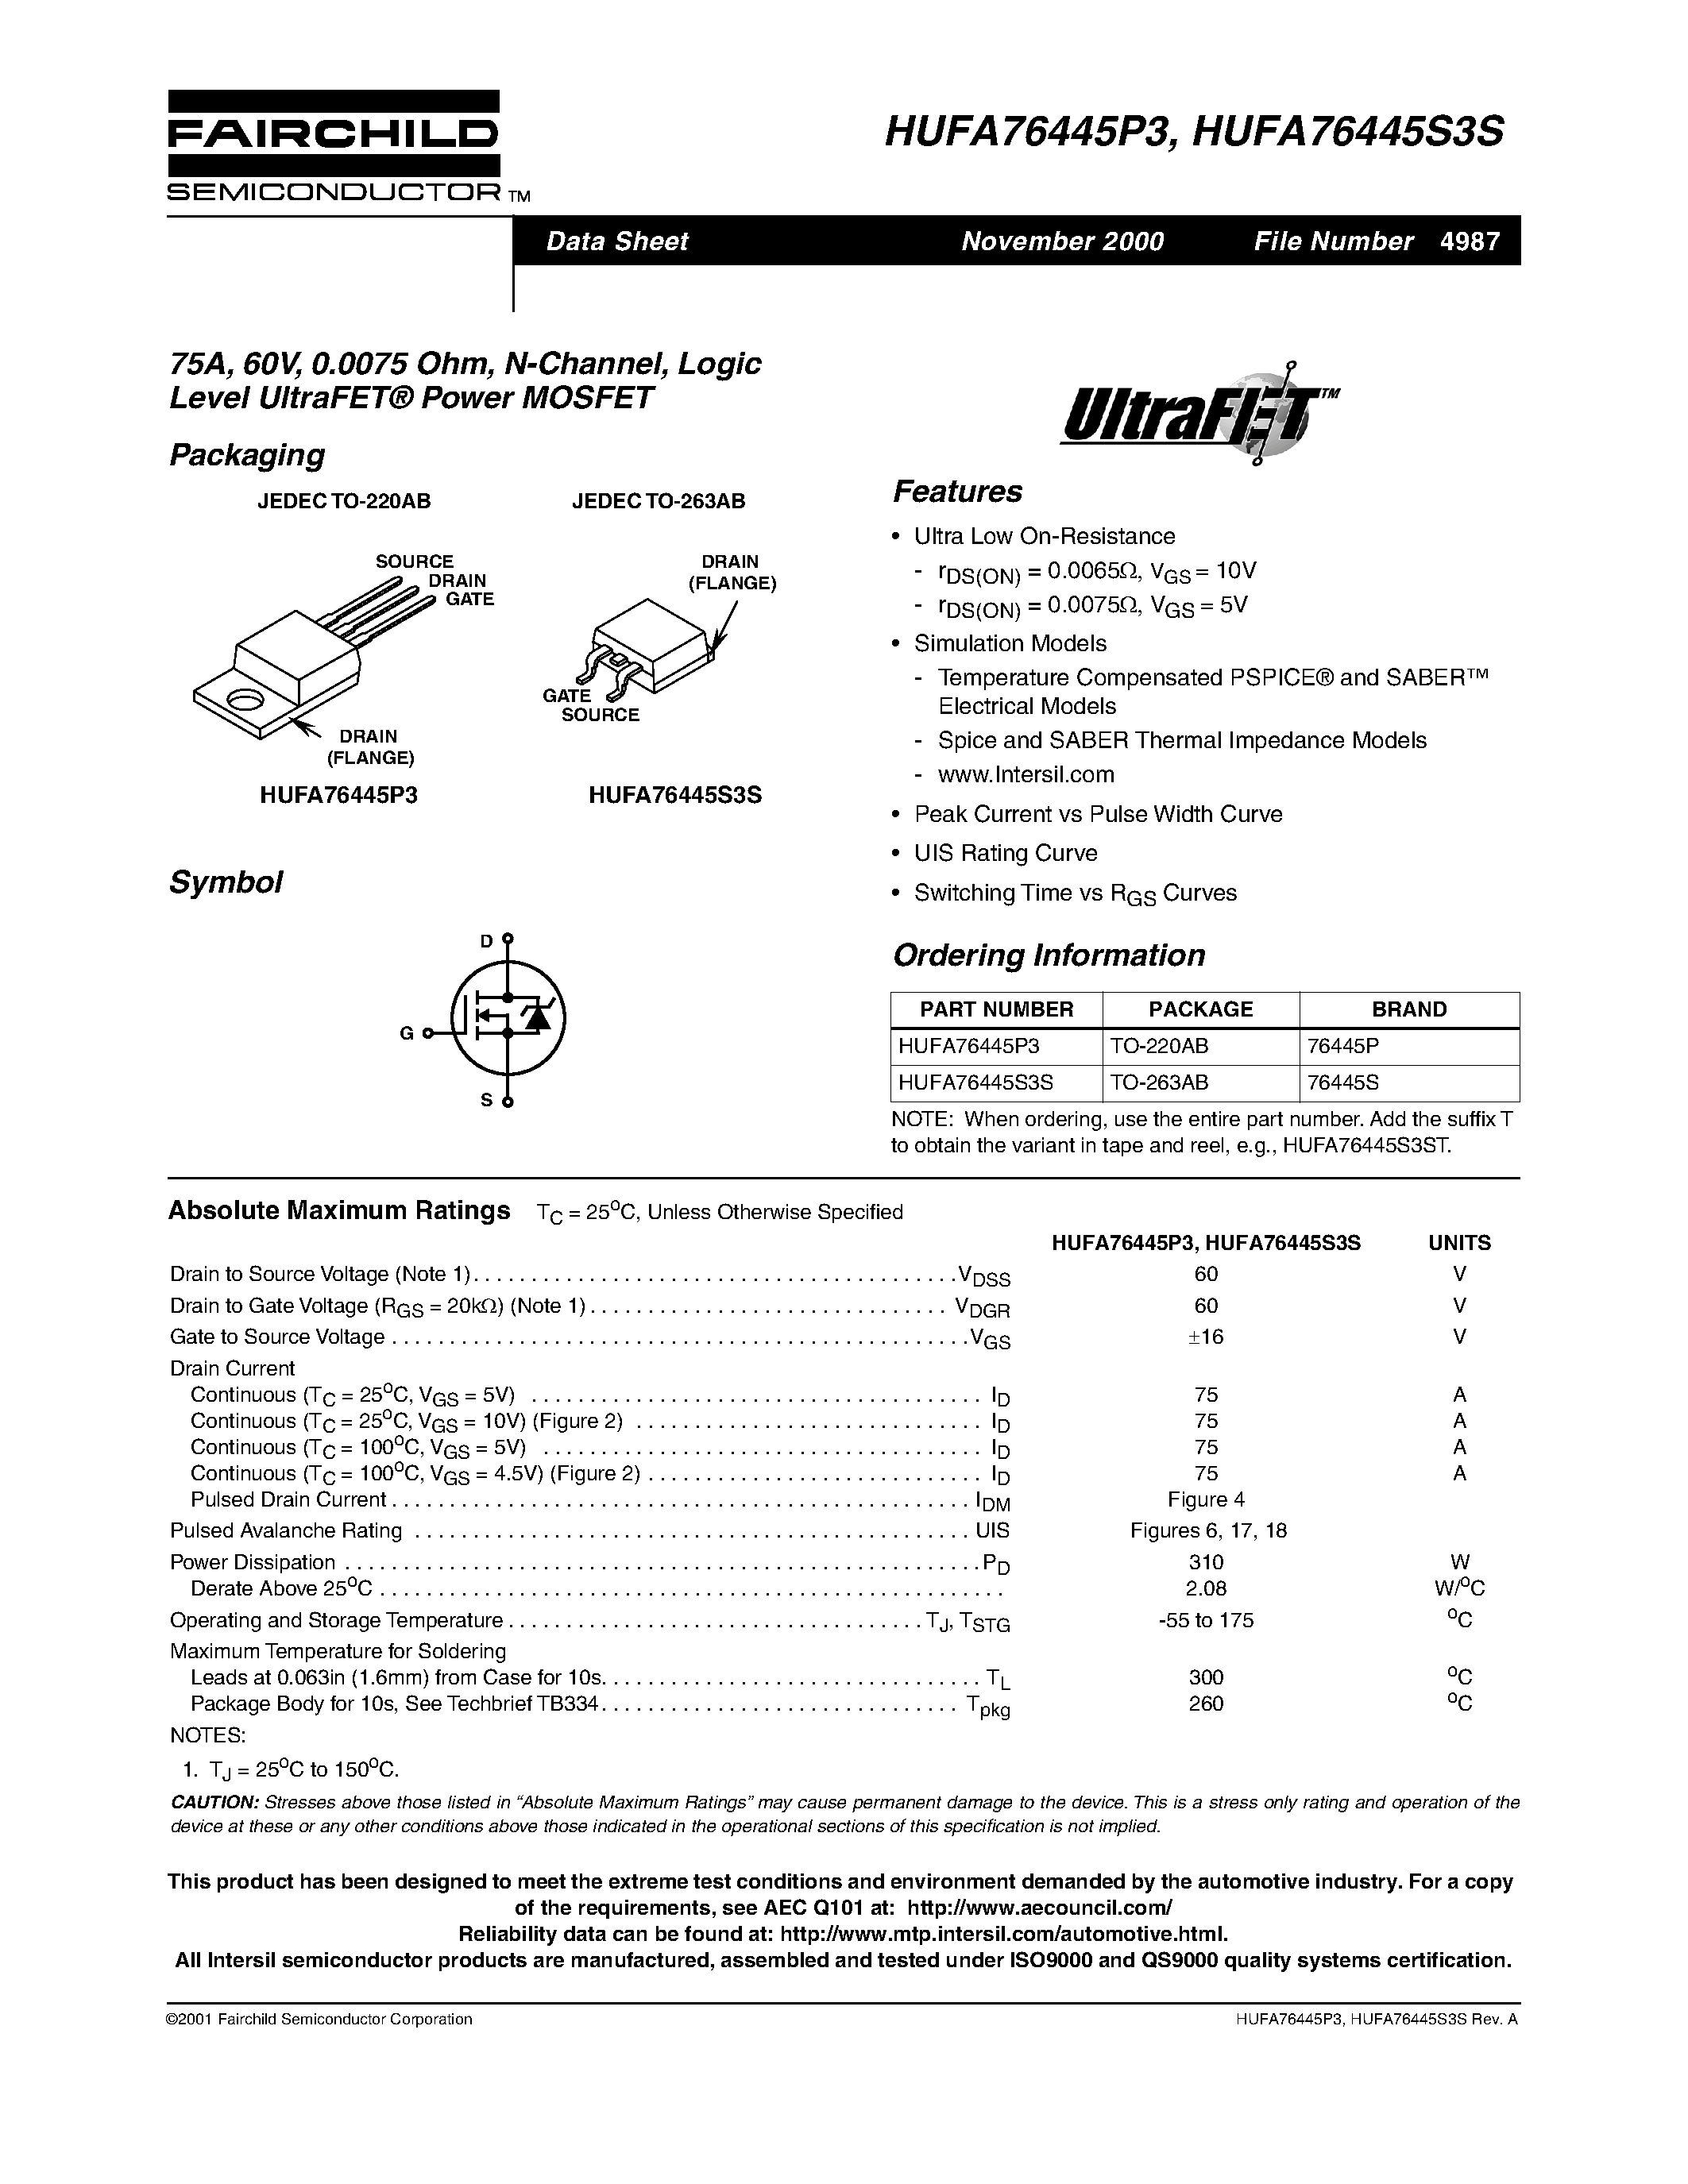 Datasheet HUFA76445P3 - 75A/ 60V/ 0.0075 Ohm/ N-Channel/ Logic Level UltraFET Power MOSFET page 1